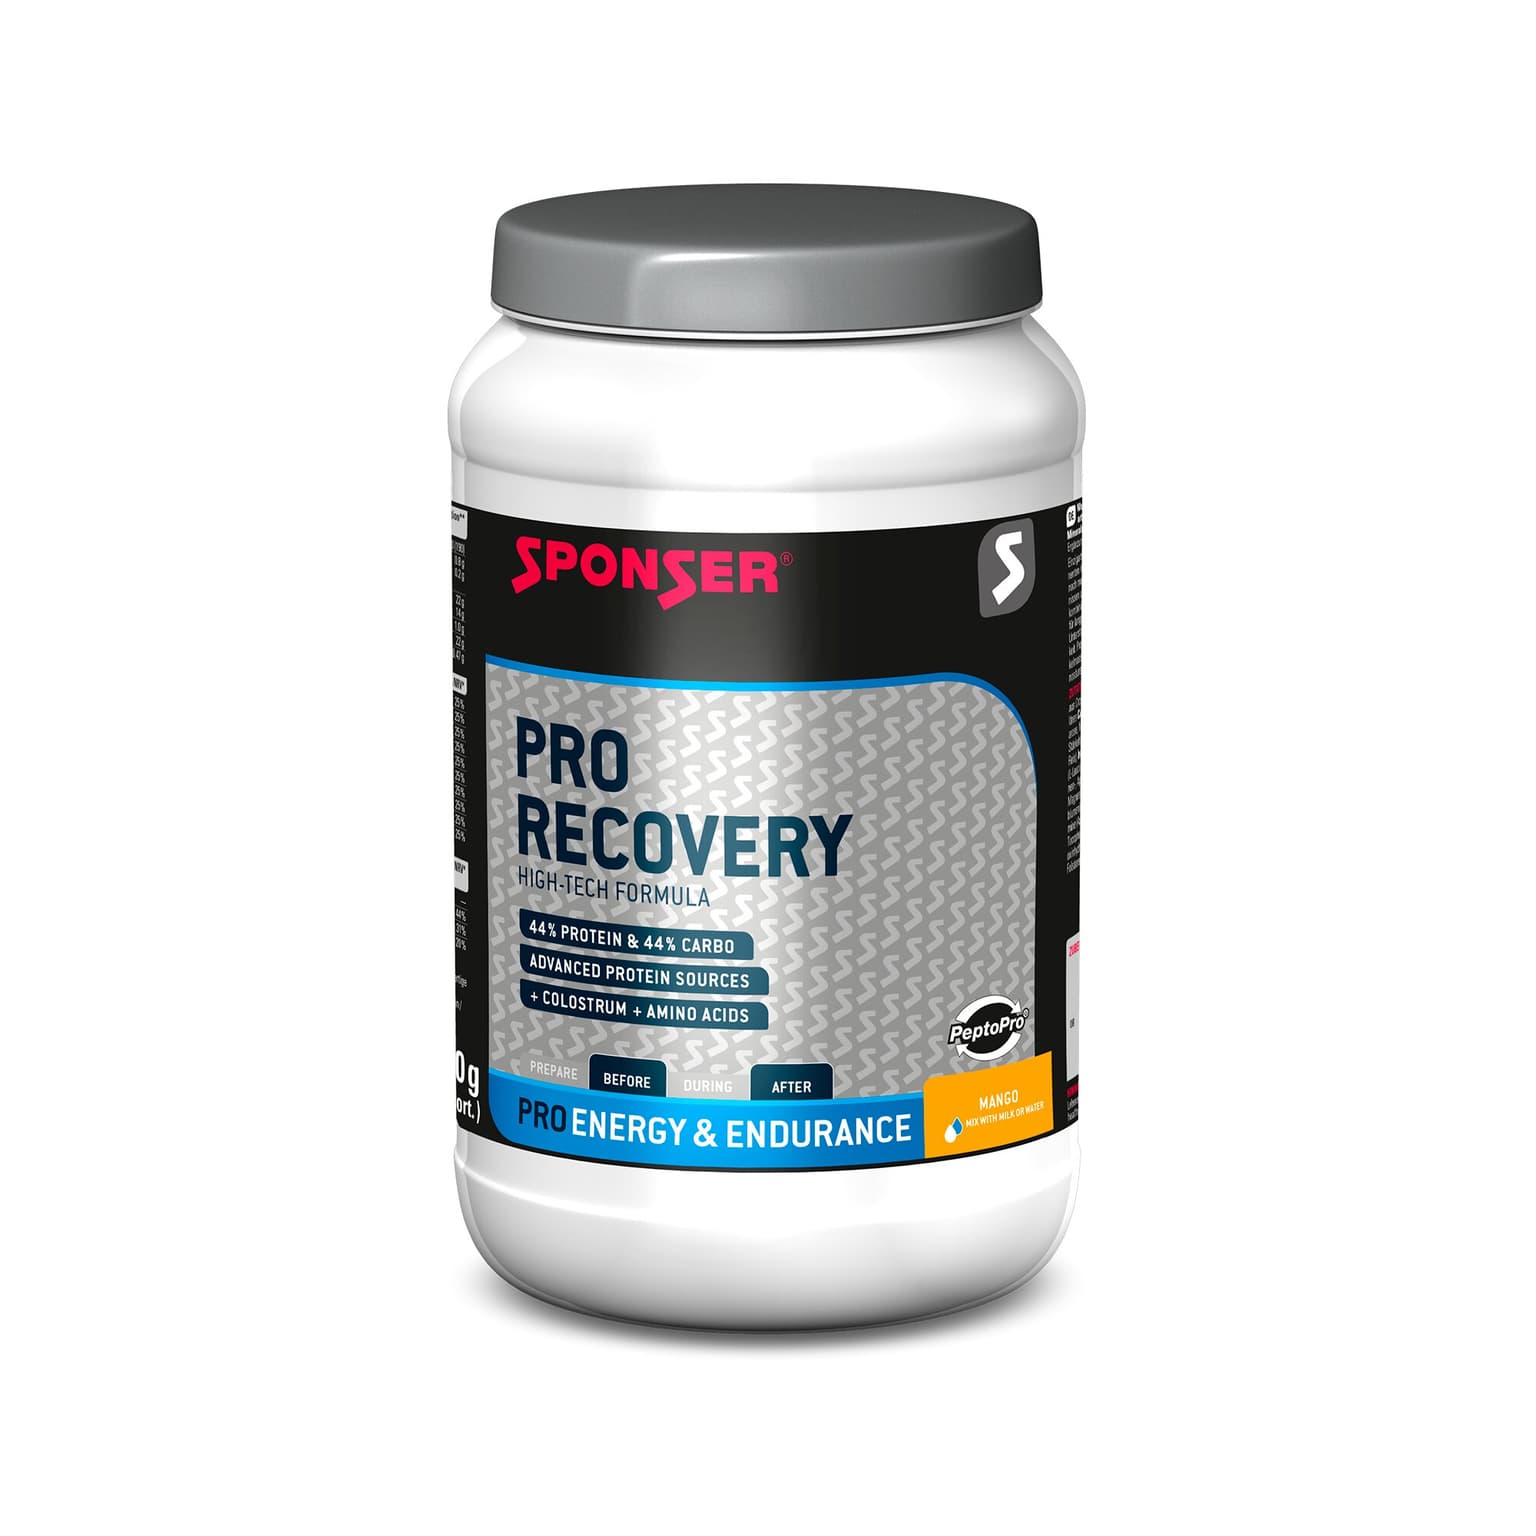 Sponser Sponser Pro Recovery Proteinpulver farbig 1